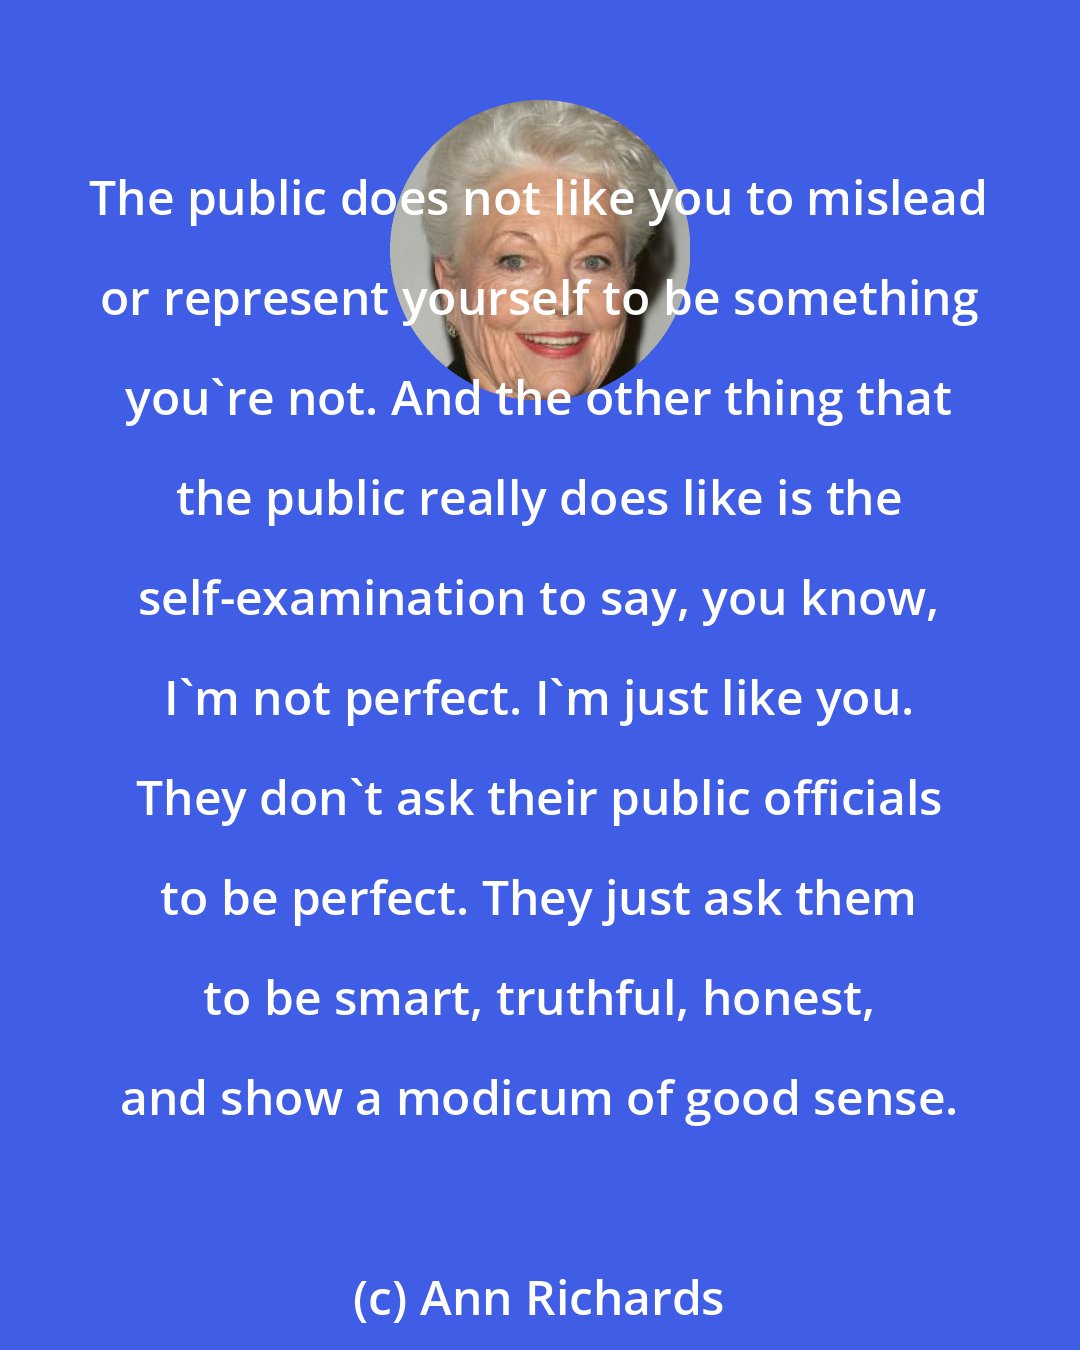 Ann Richards: The public does not like you to mislead or represent yourself to be something you're not. And the other thing that the public really does like is the self-examination to say, you know, I'm not perfect. I'm just like you. They don't ask their public officials to be perfect. They just ask them to be smart, truthful, honest, and show a modicum of good sense.